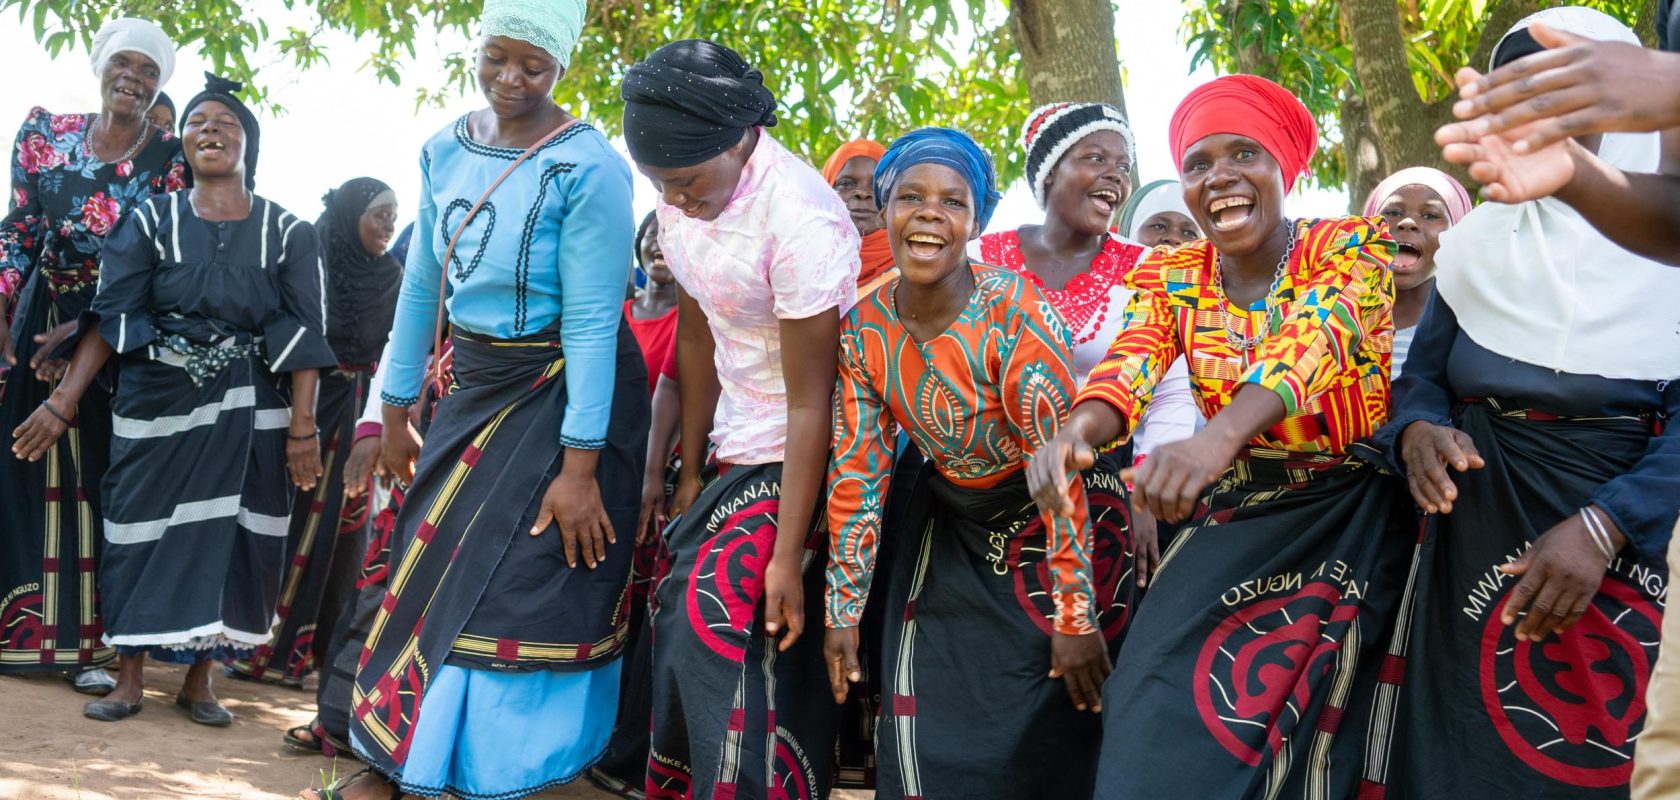 A group of women from the Chimwemwe Mayi Walas are dancing and celebrating together under a tree.